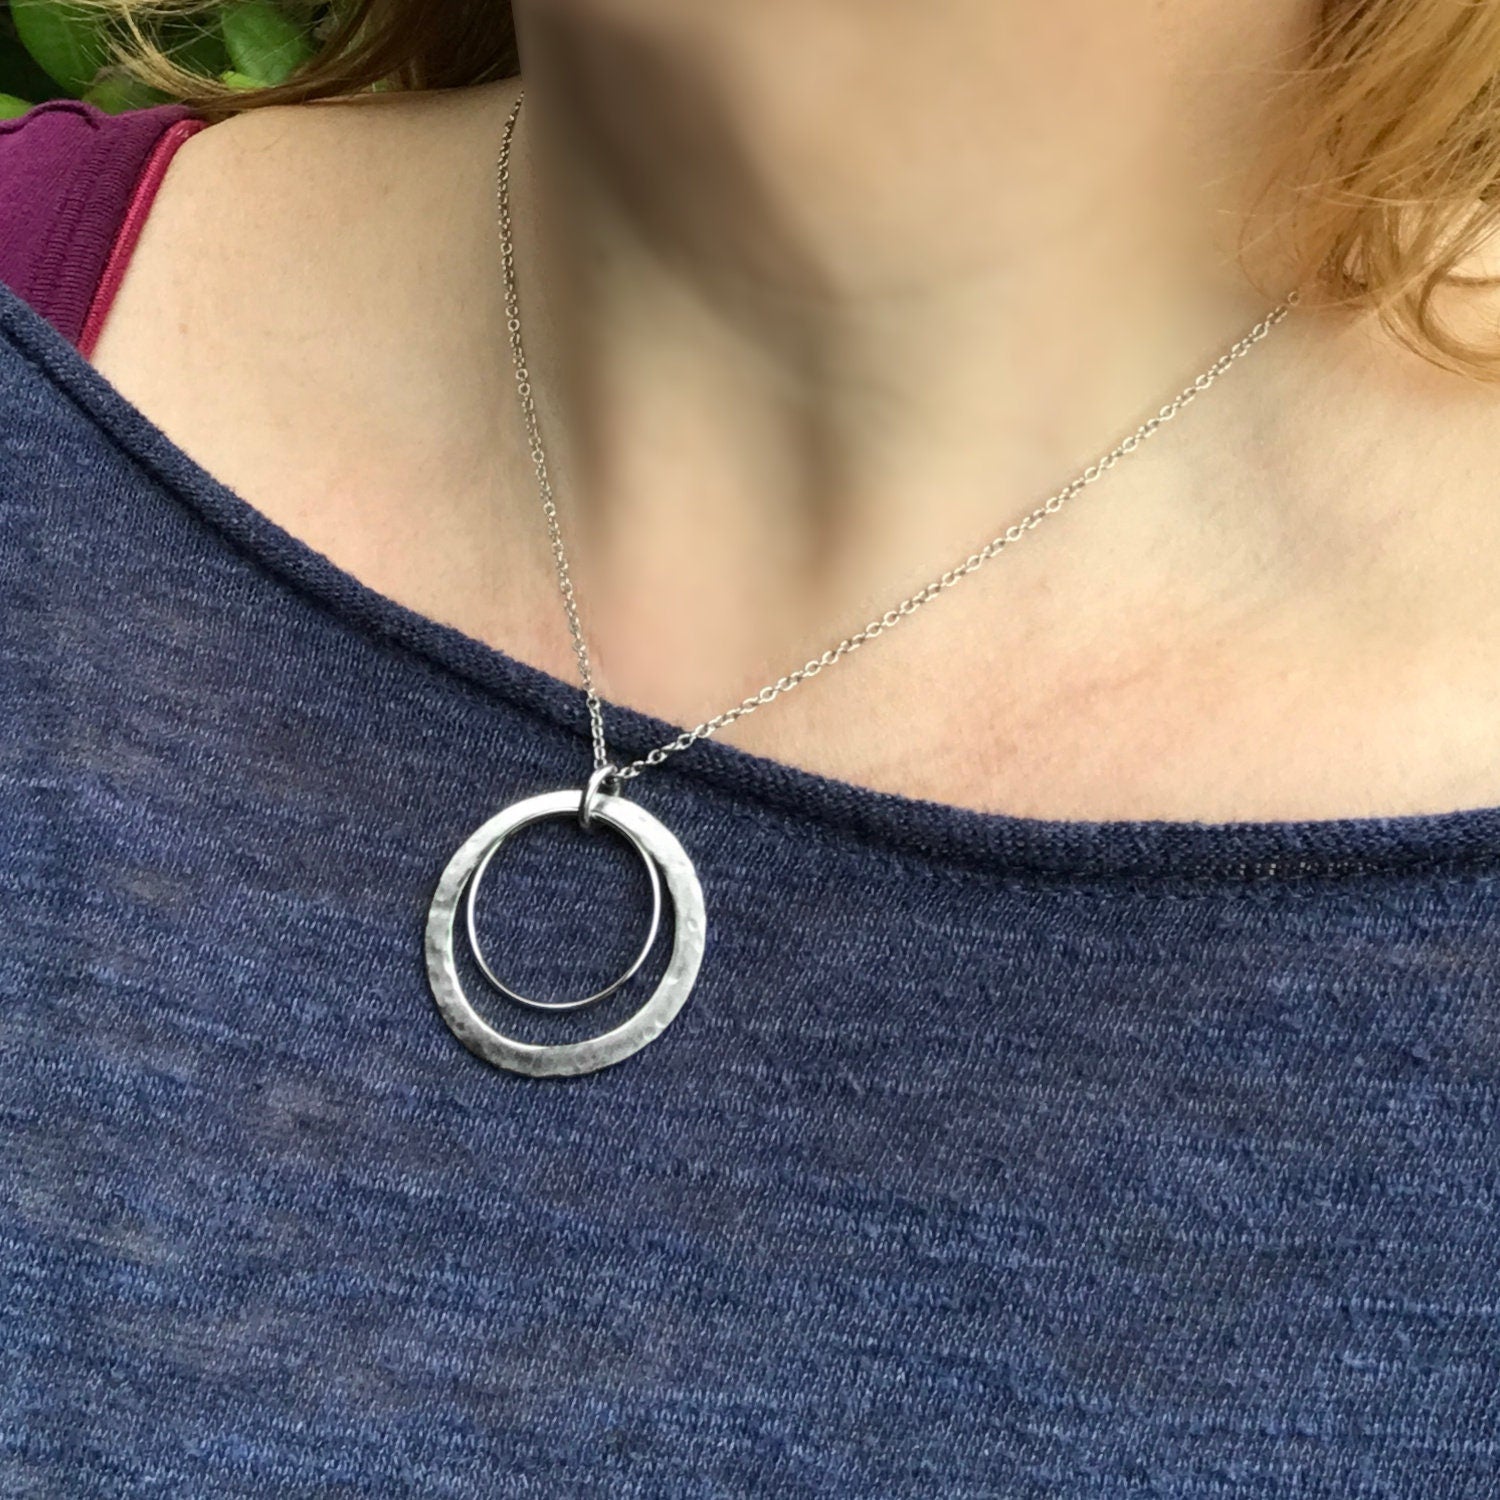 Jeanne Marell | Convertible necklace/ring 'Circle+|- #2 Bite'